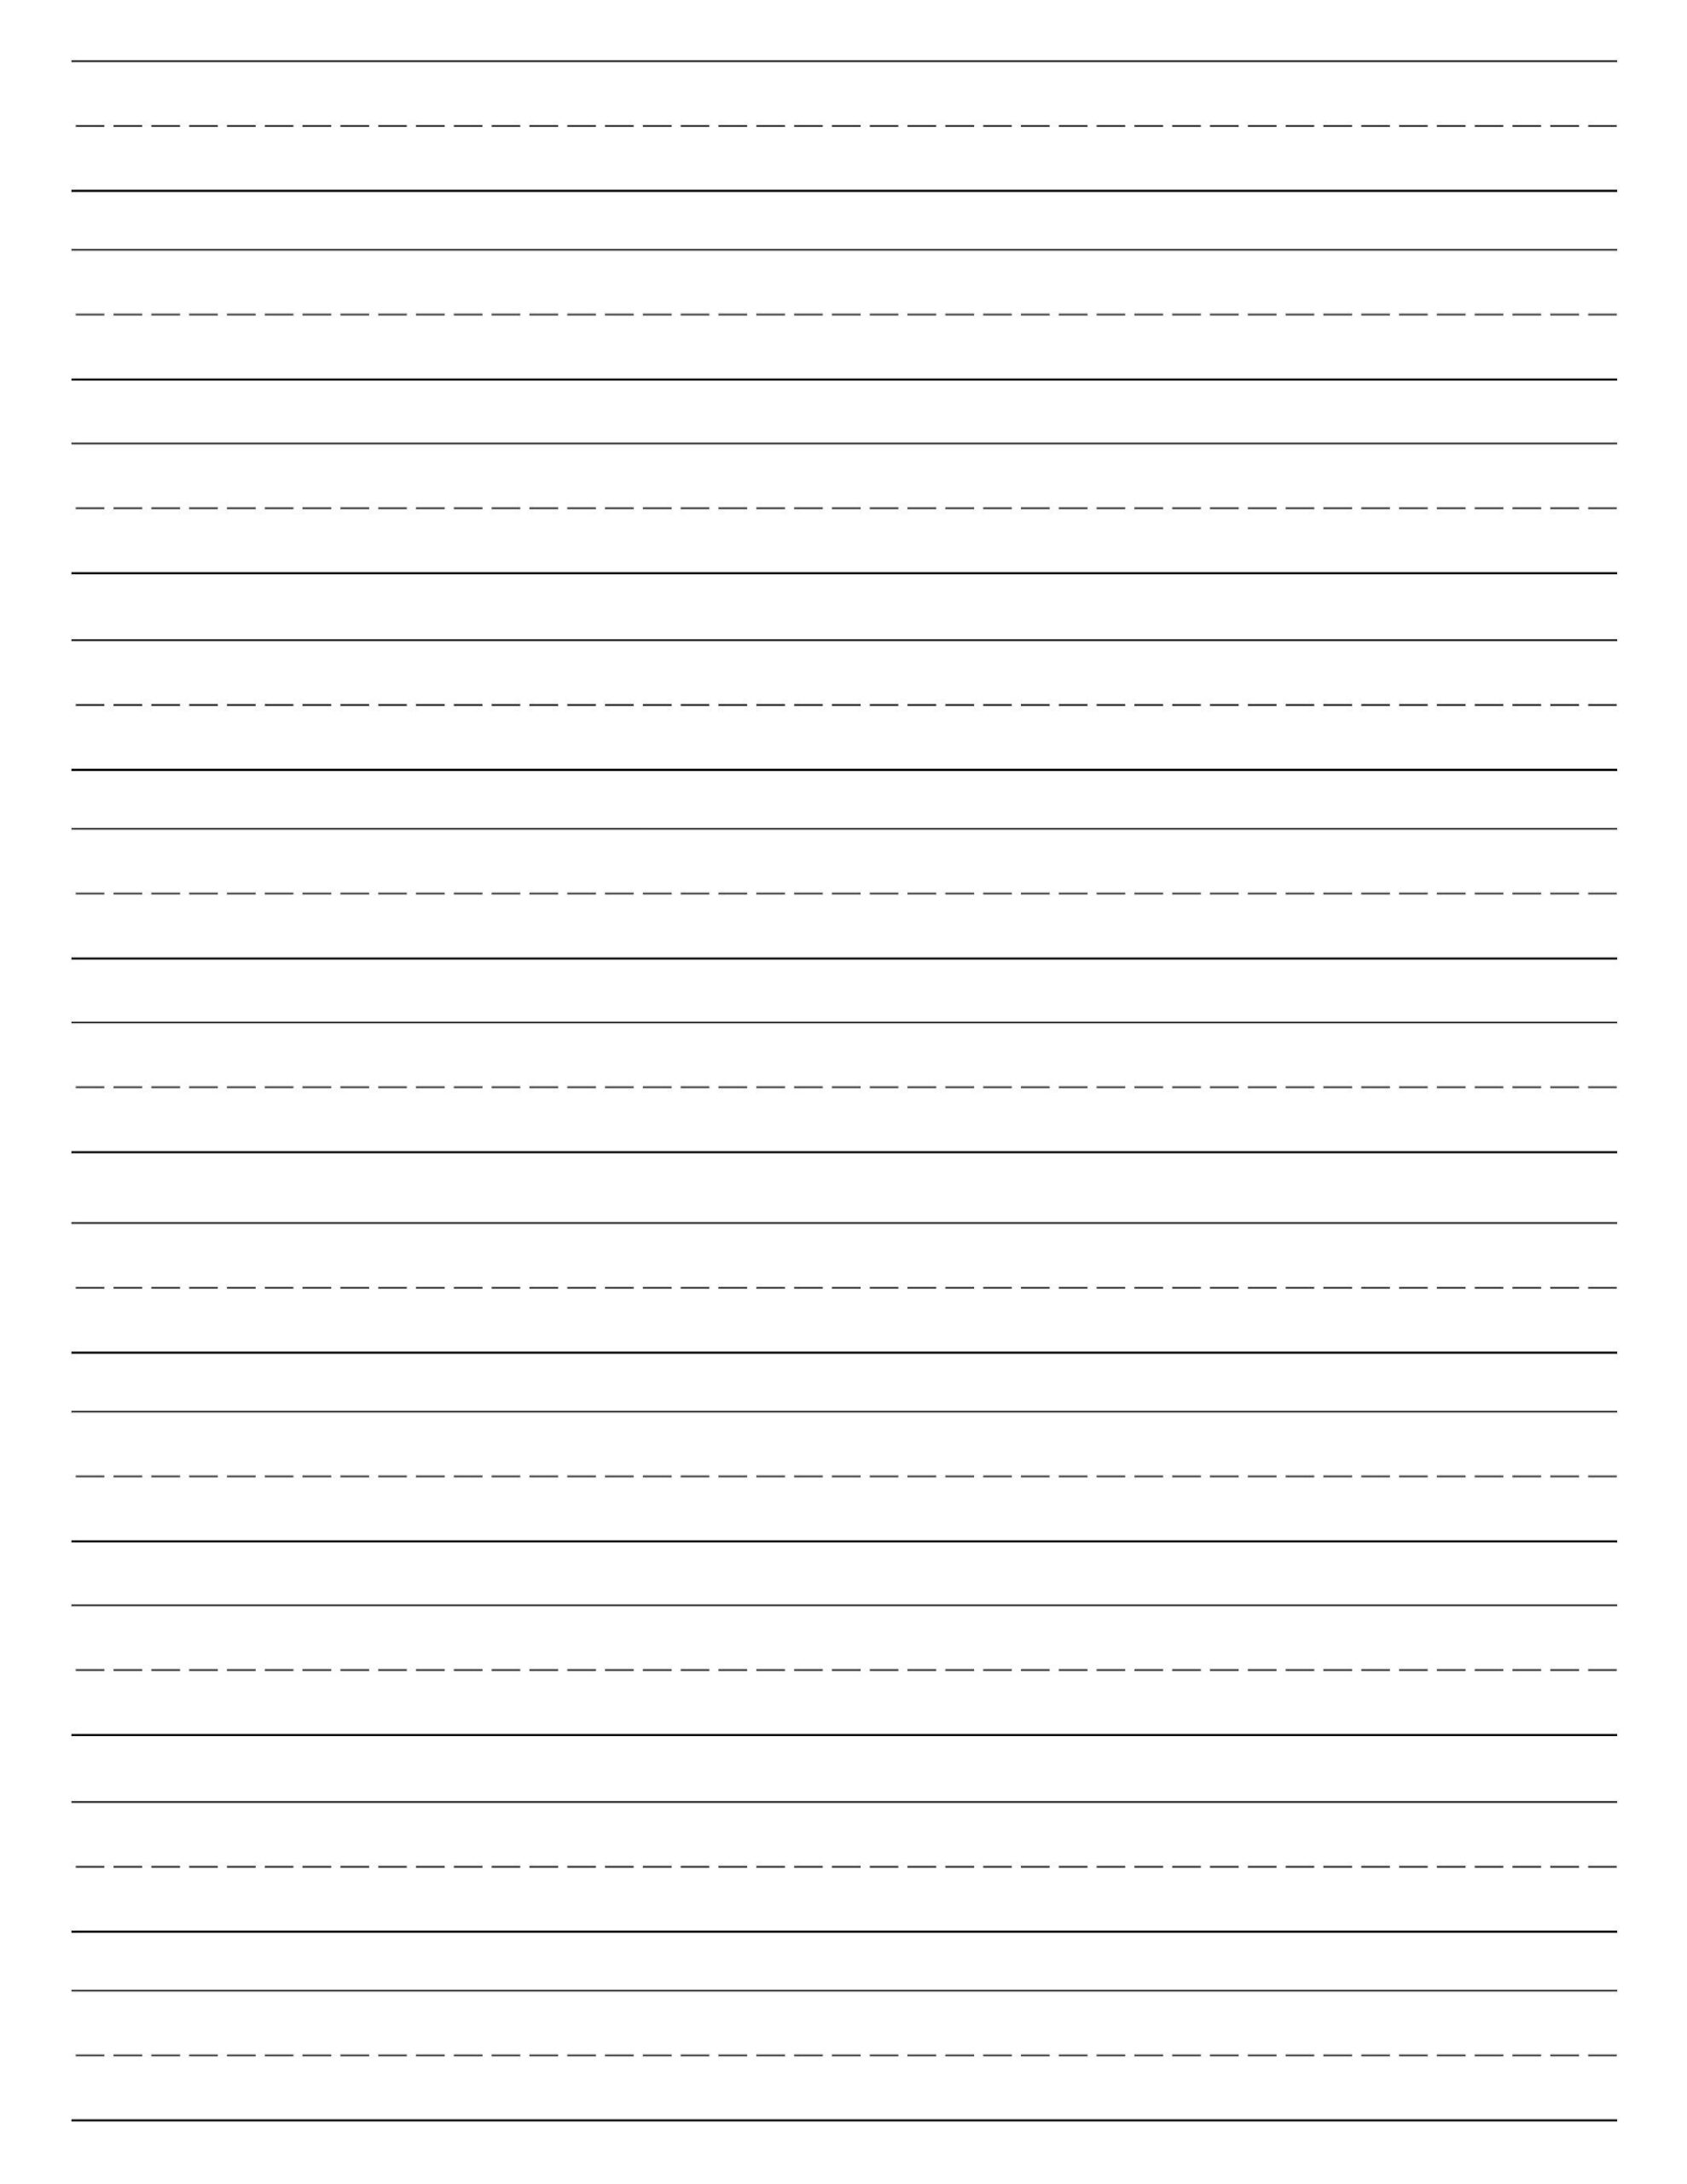 Printable Lined Paper For Elementary Writing